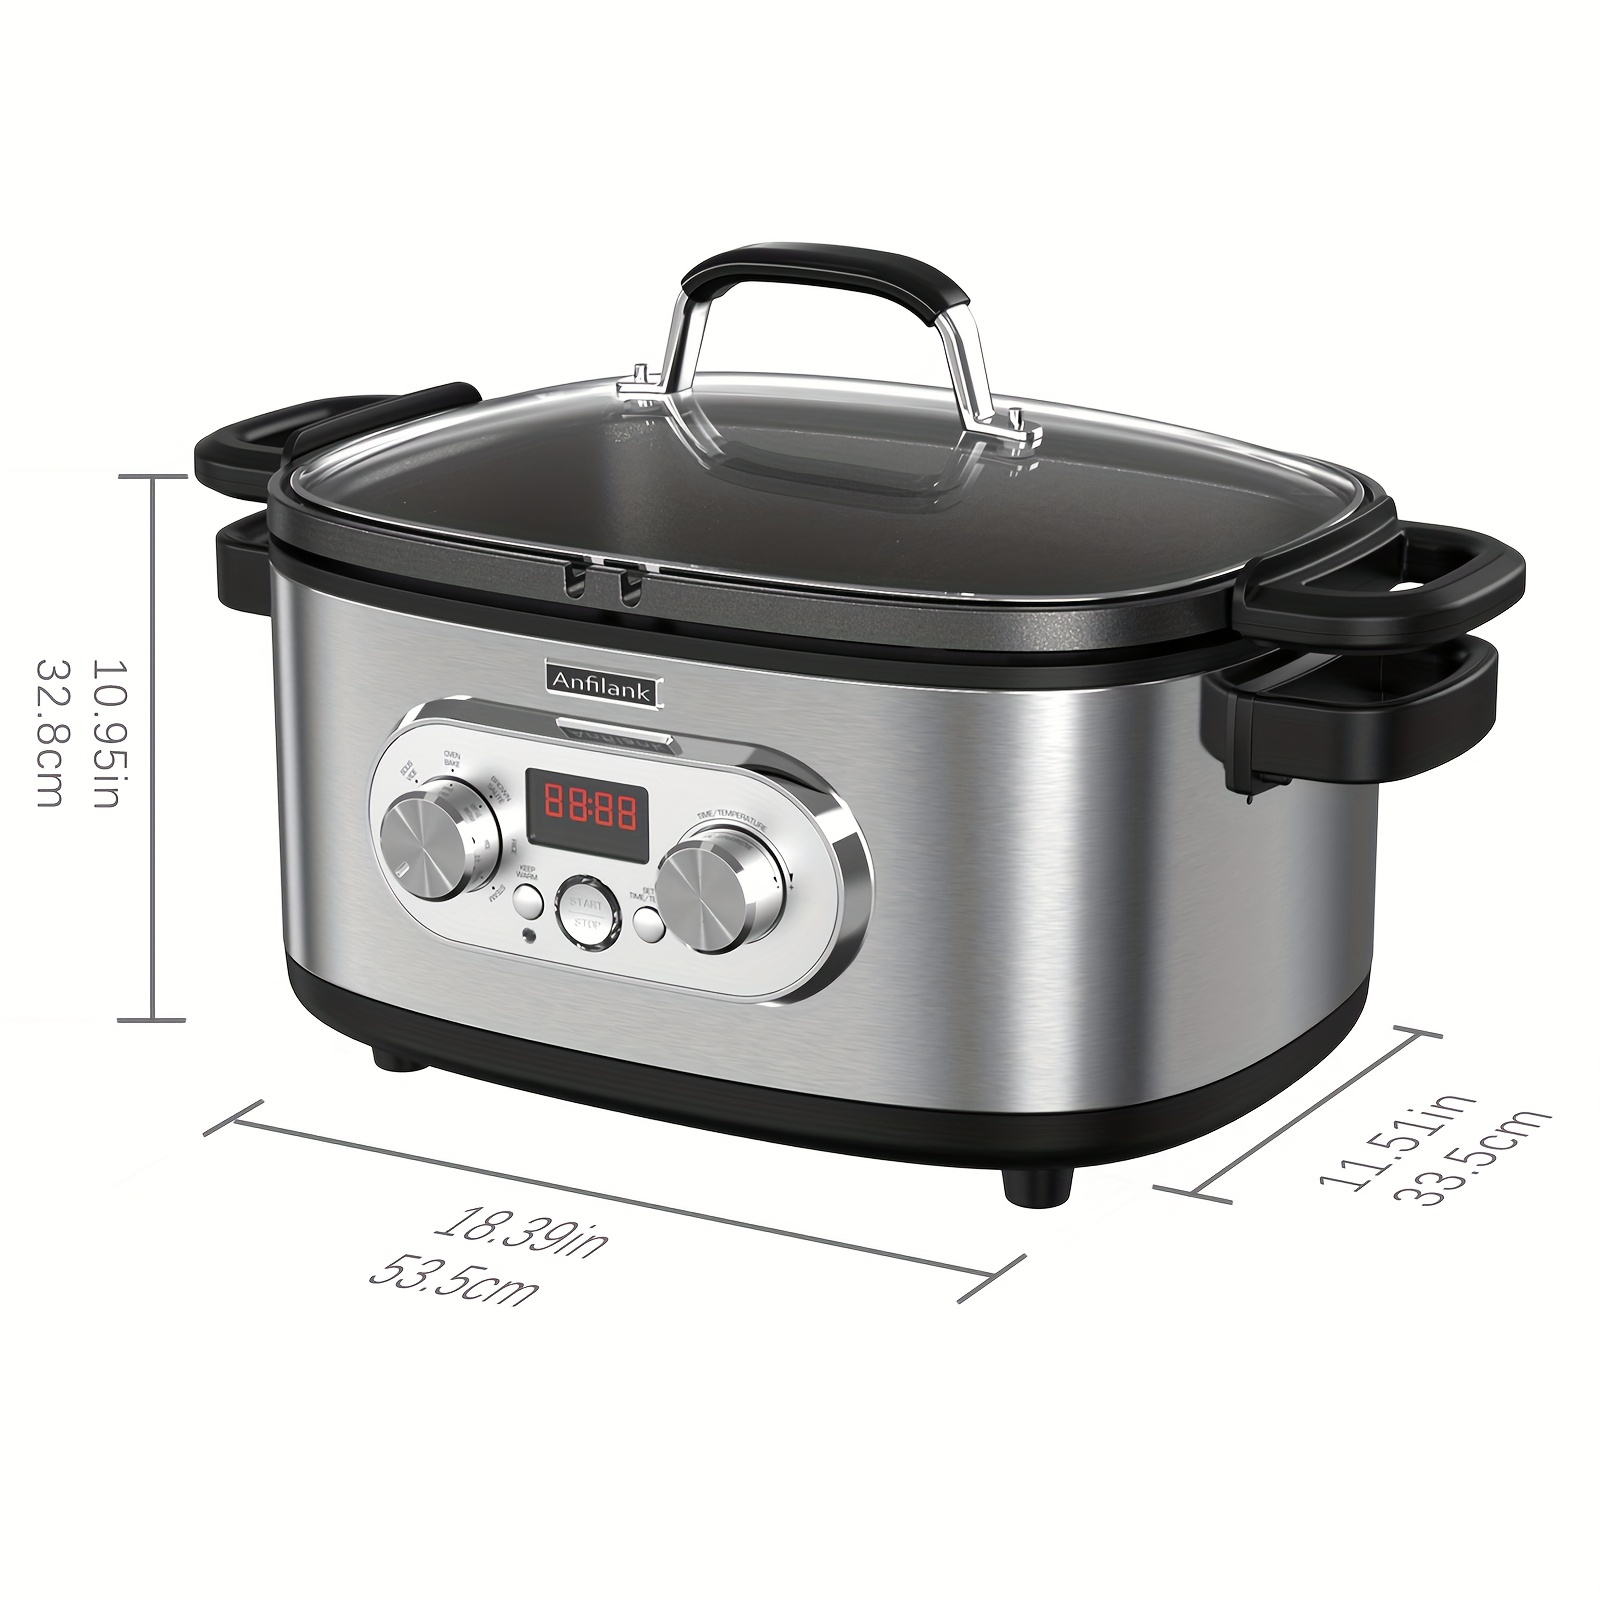  Wolf Gourmet Programmable 6-in-1 Multi Cooker with